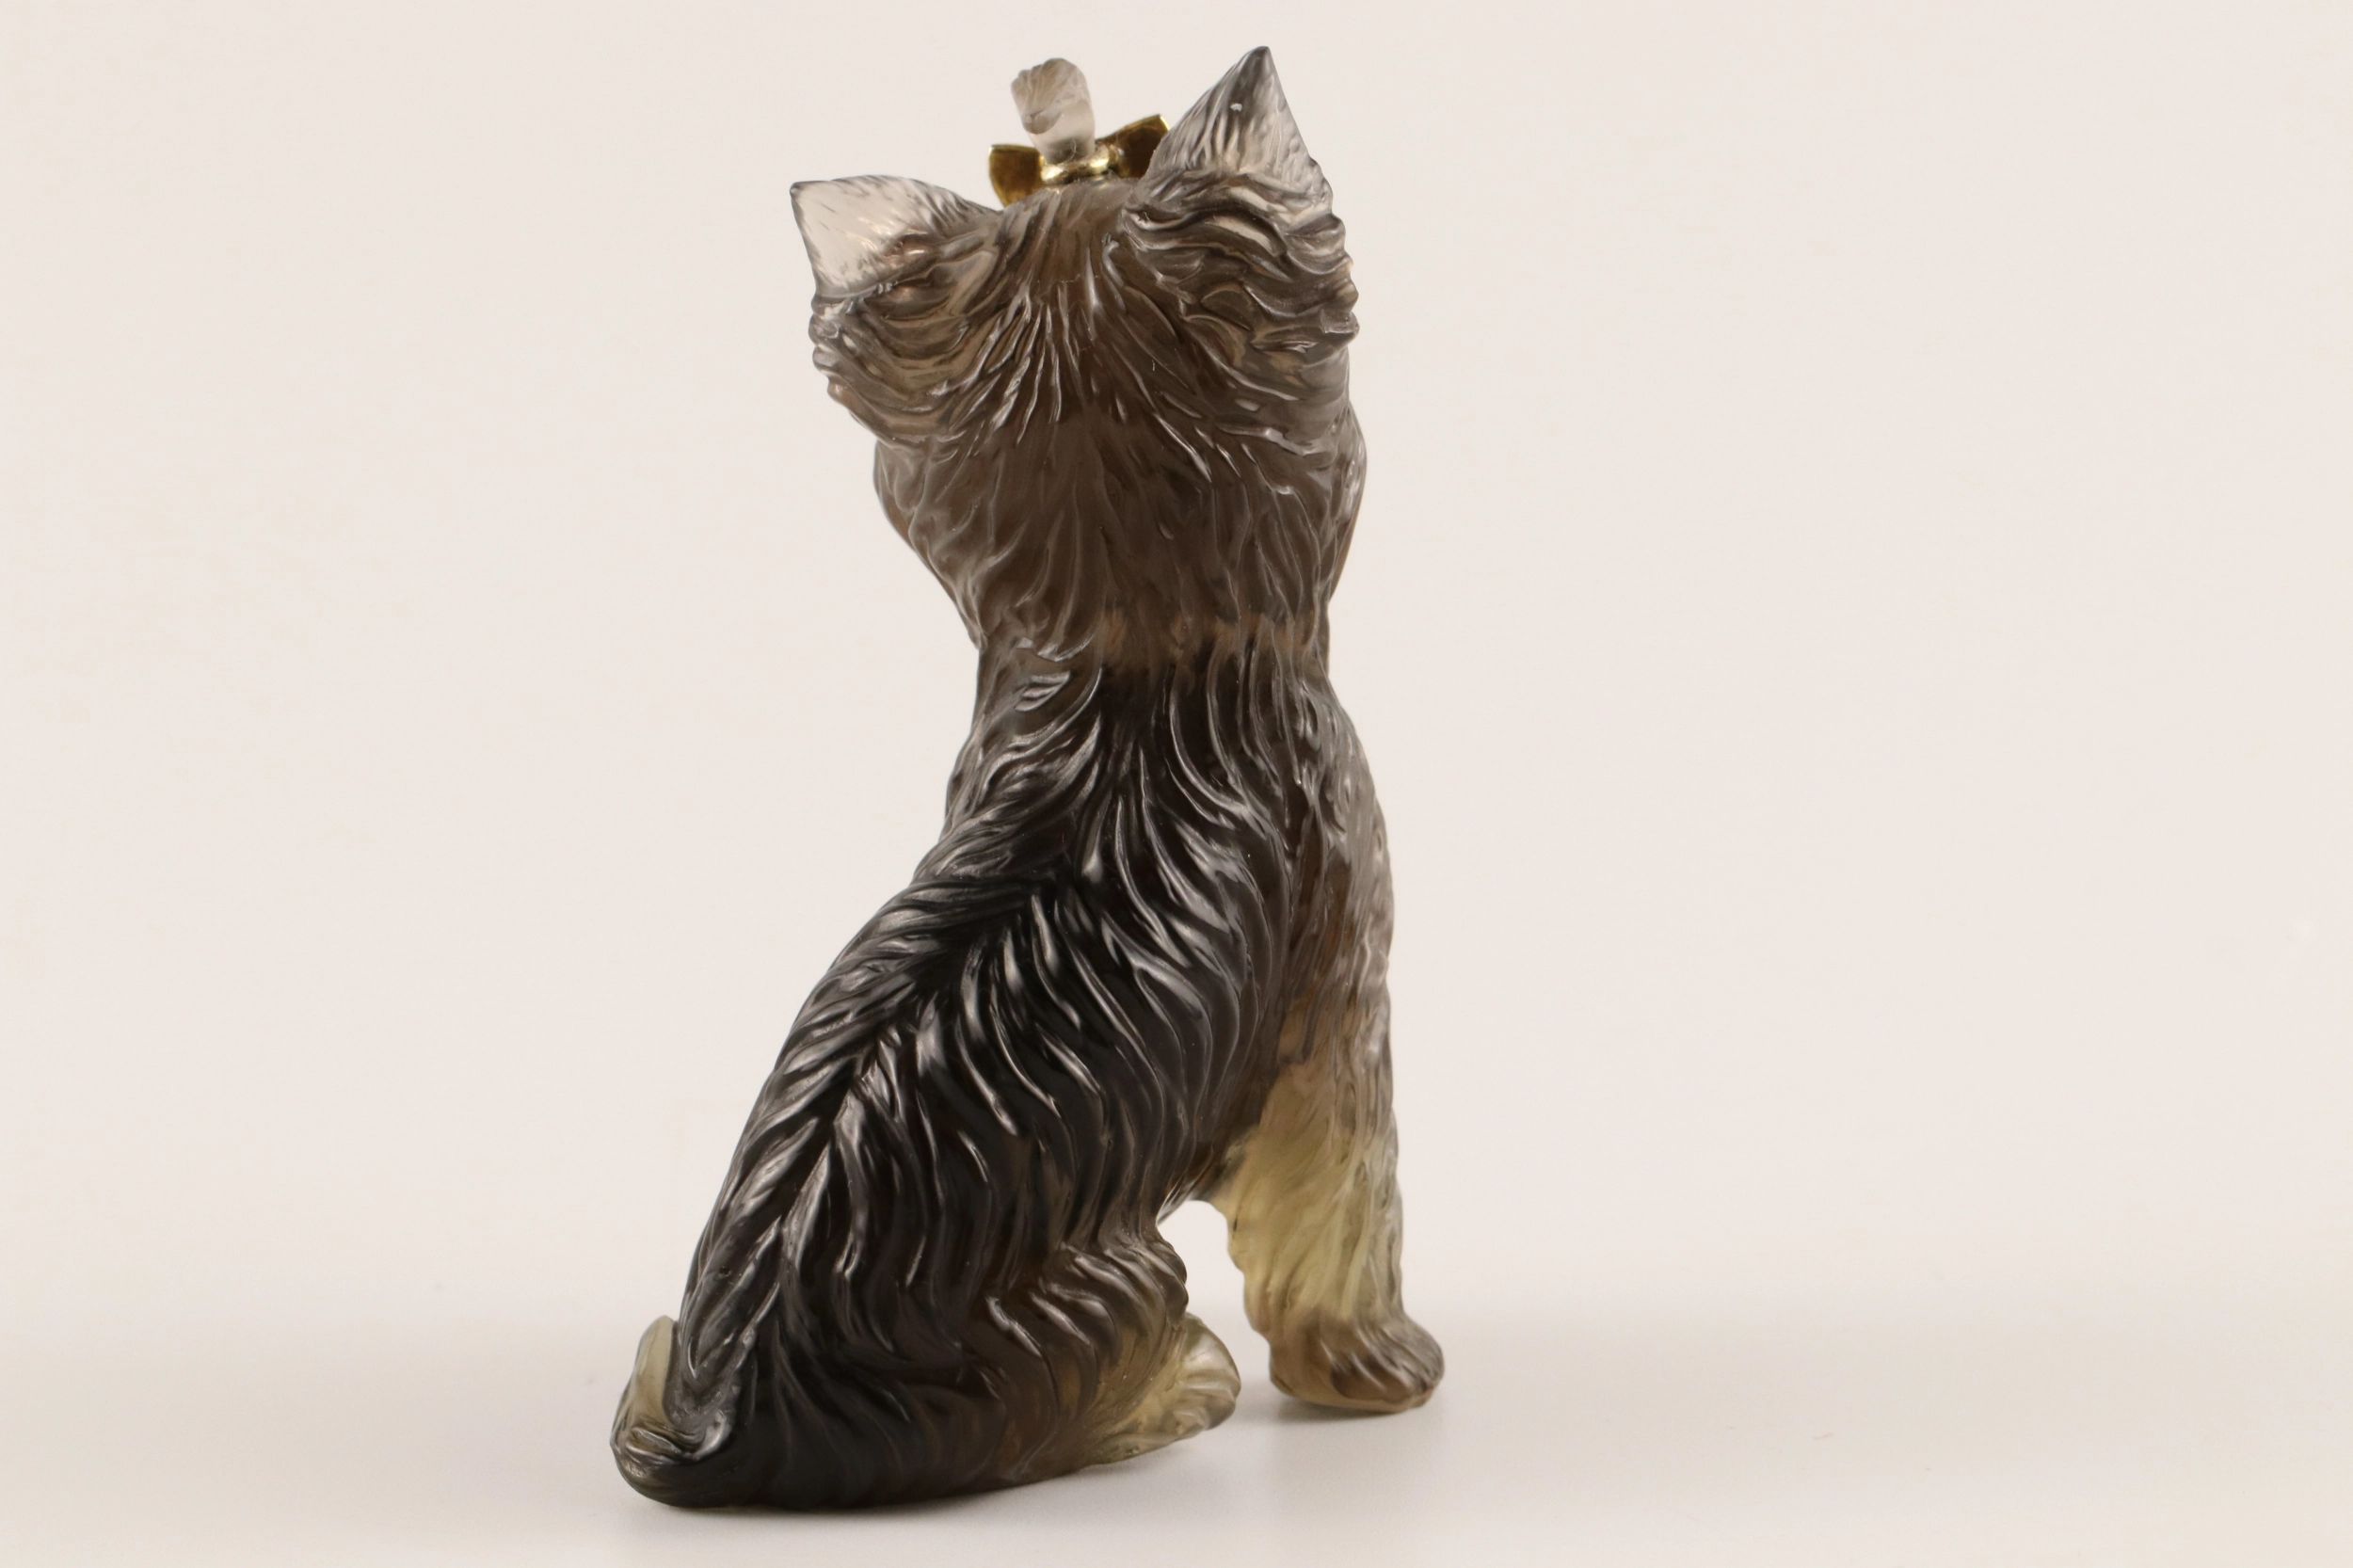 Stone-cut figurine Yorkshire Terrier in the style of Faberge 20th century. - Image 5 of 5